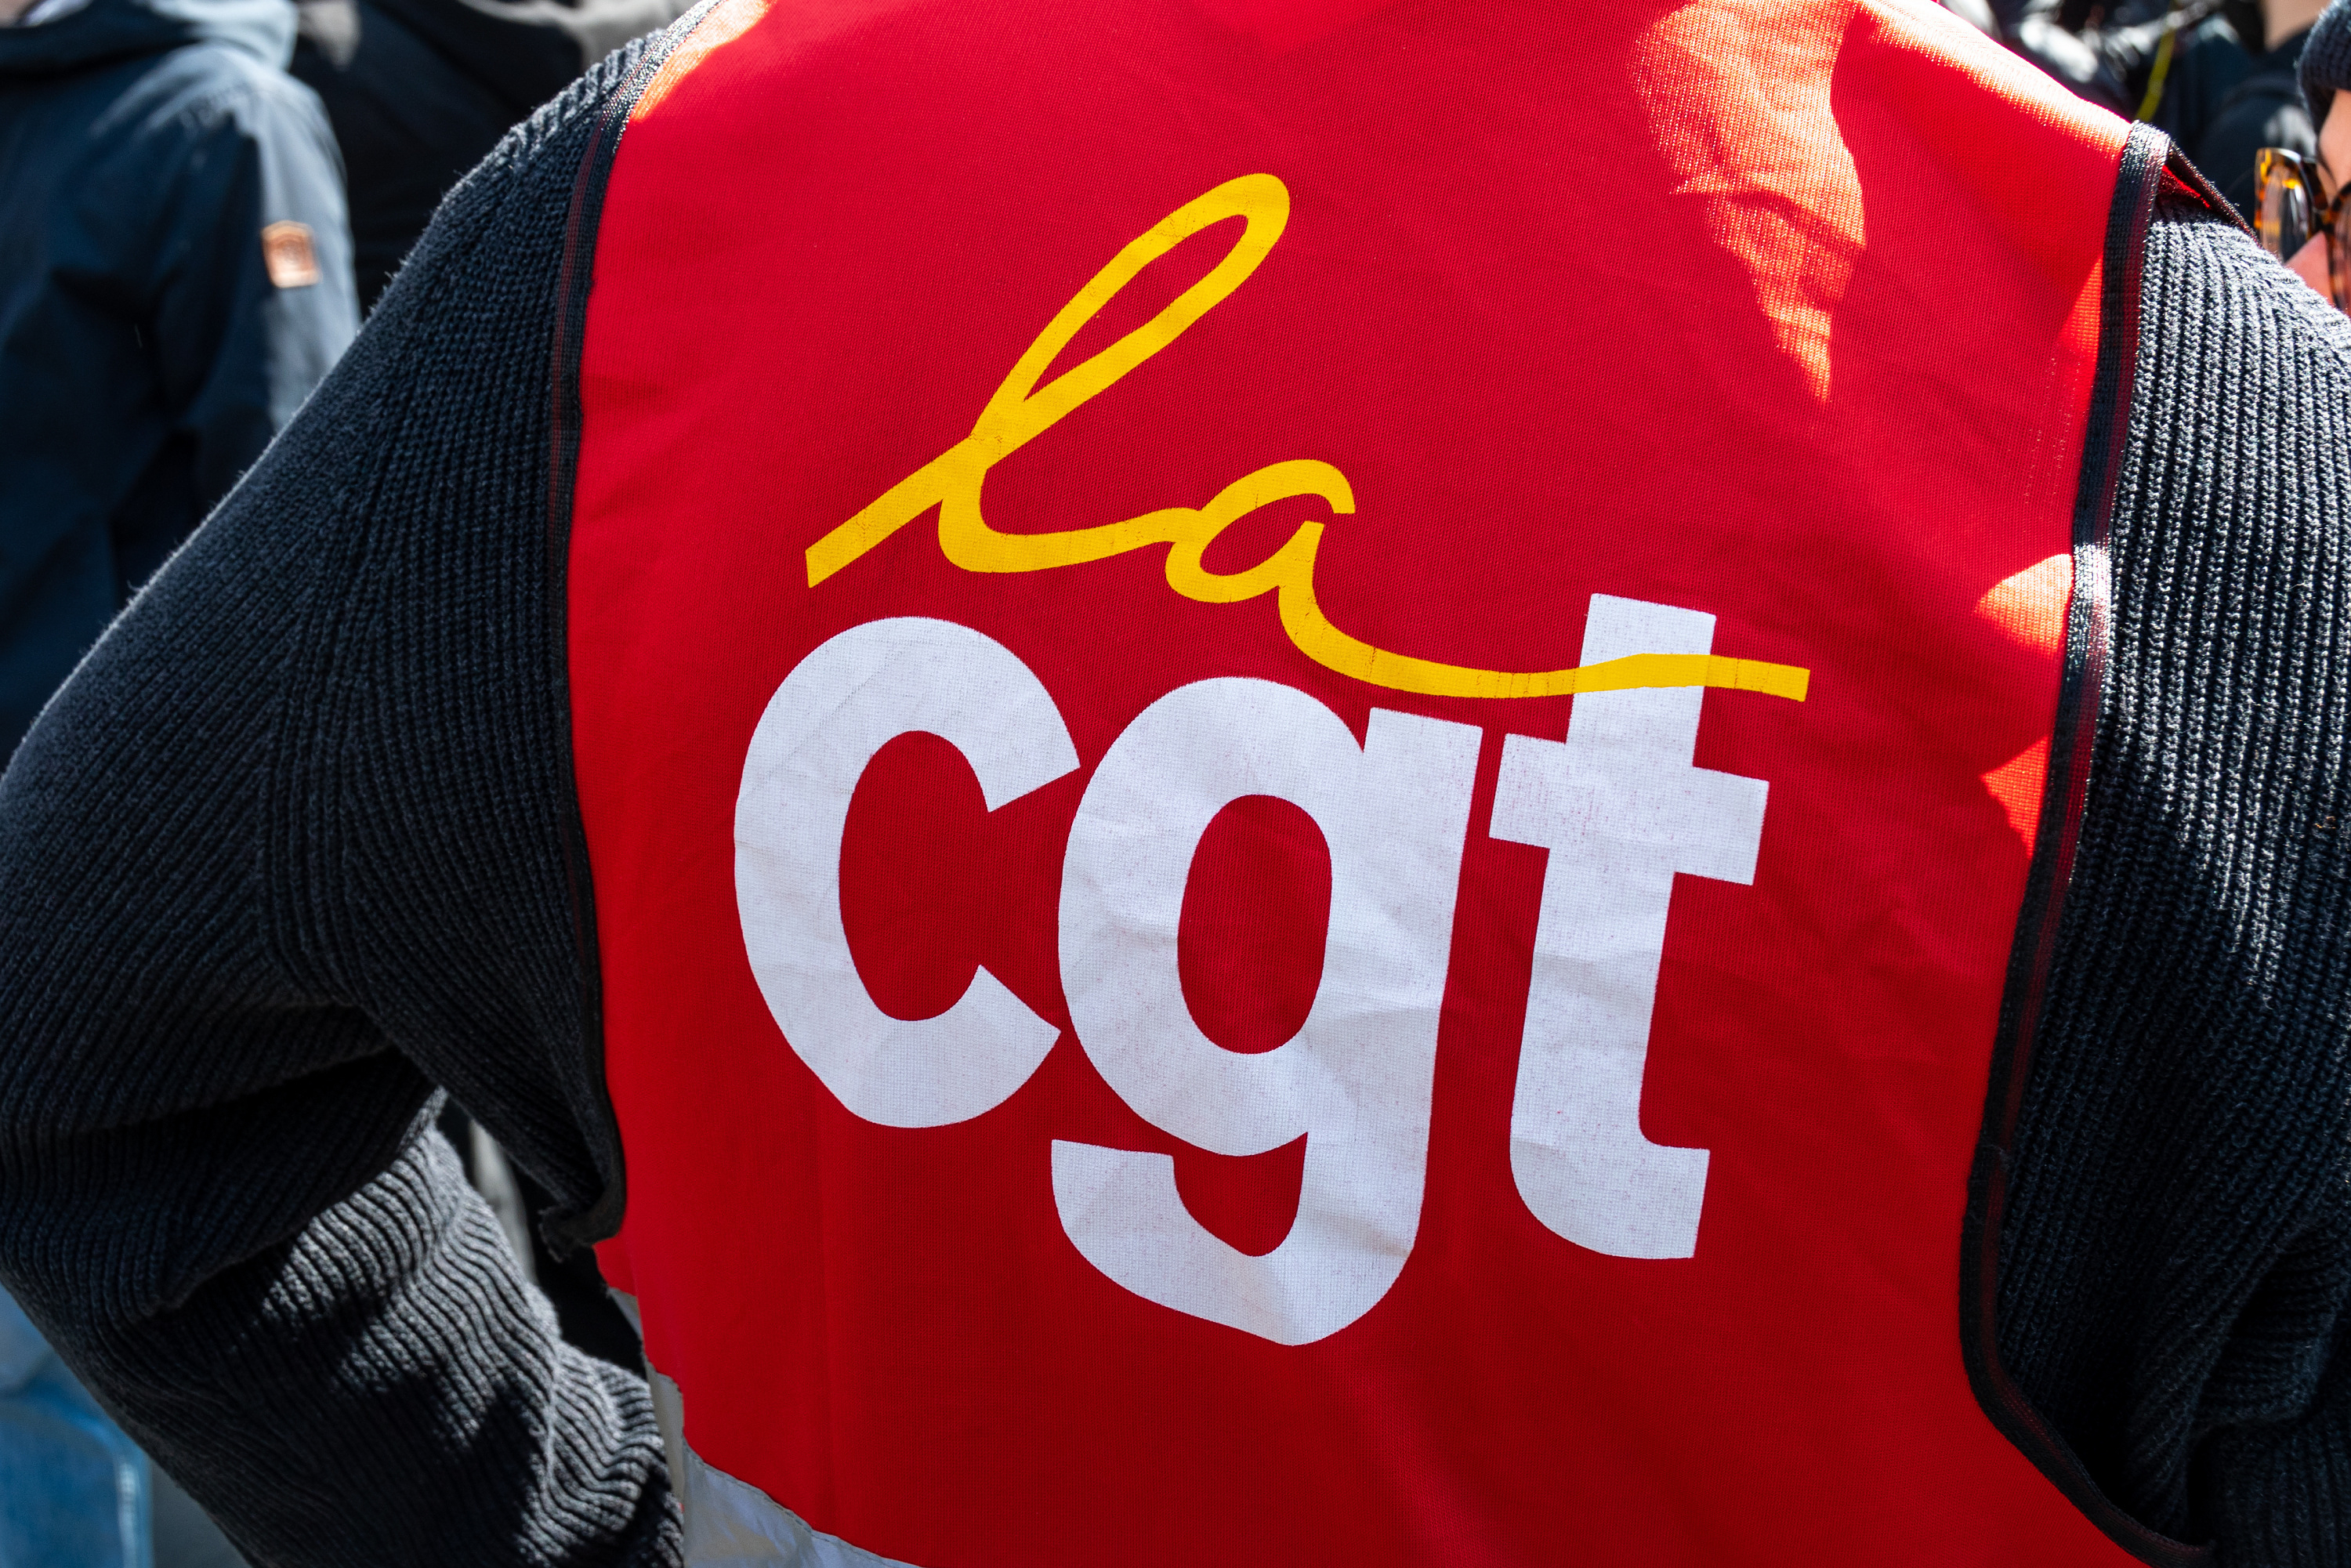 Civil service: the CGT has filed strike notices for the Olympics